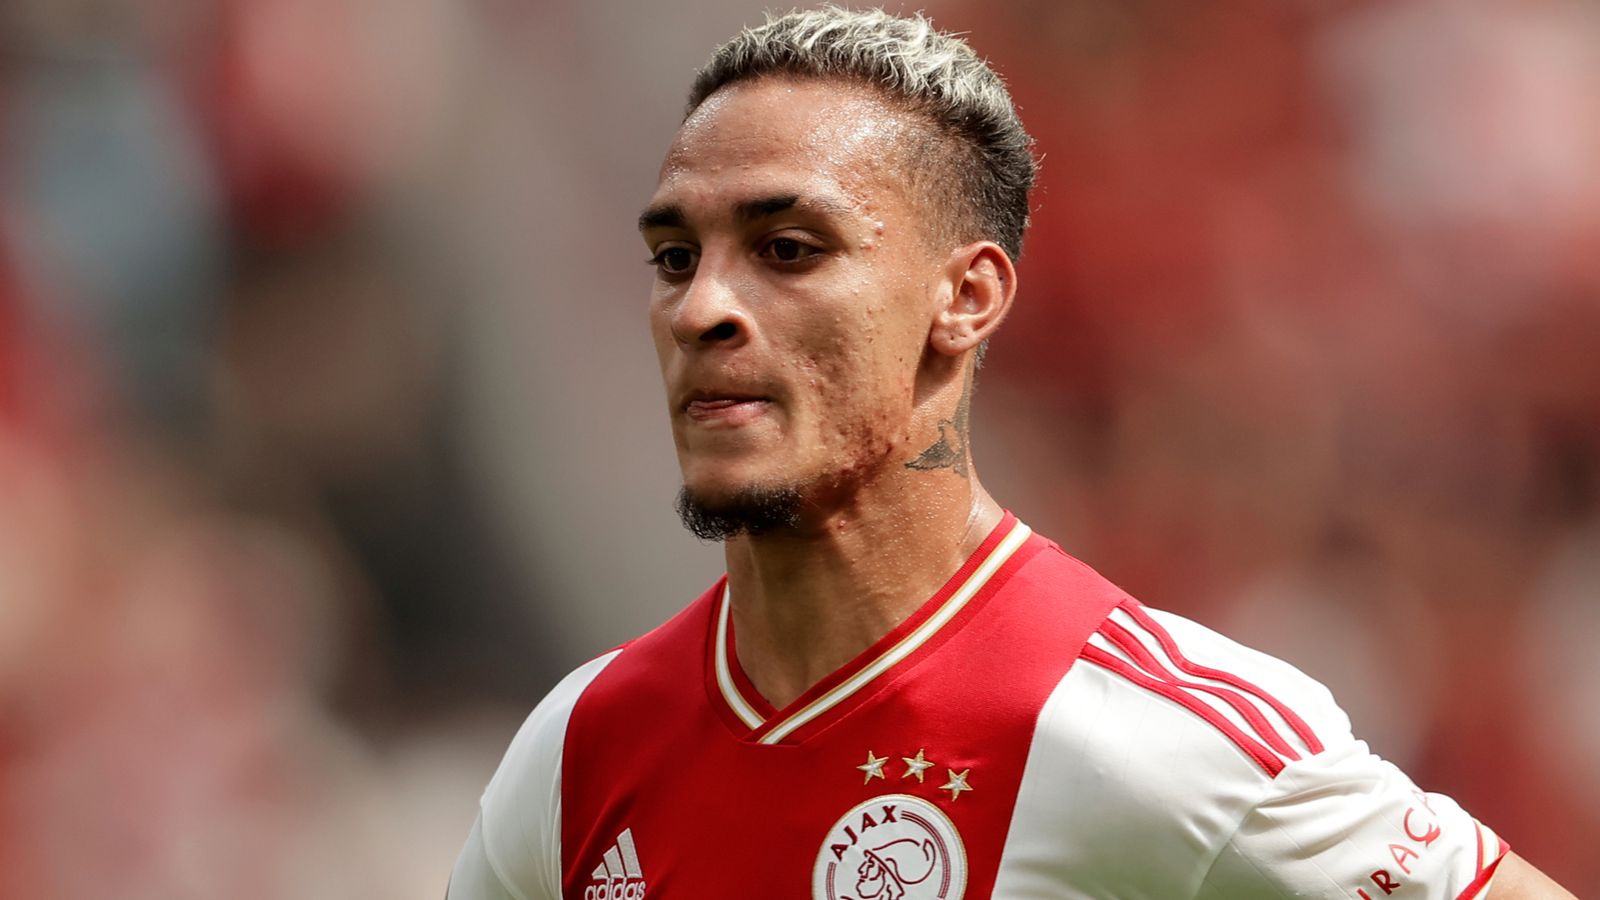 Antony: Manchester United confirm agreement with Ajax for £86m transfer of forward